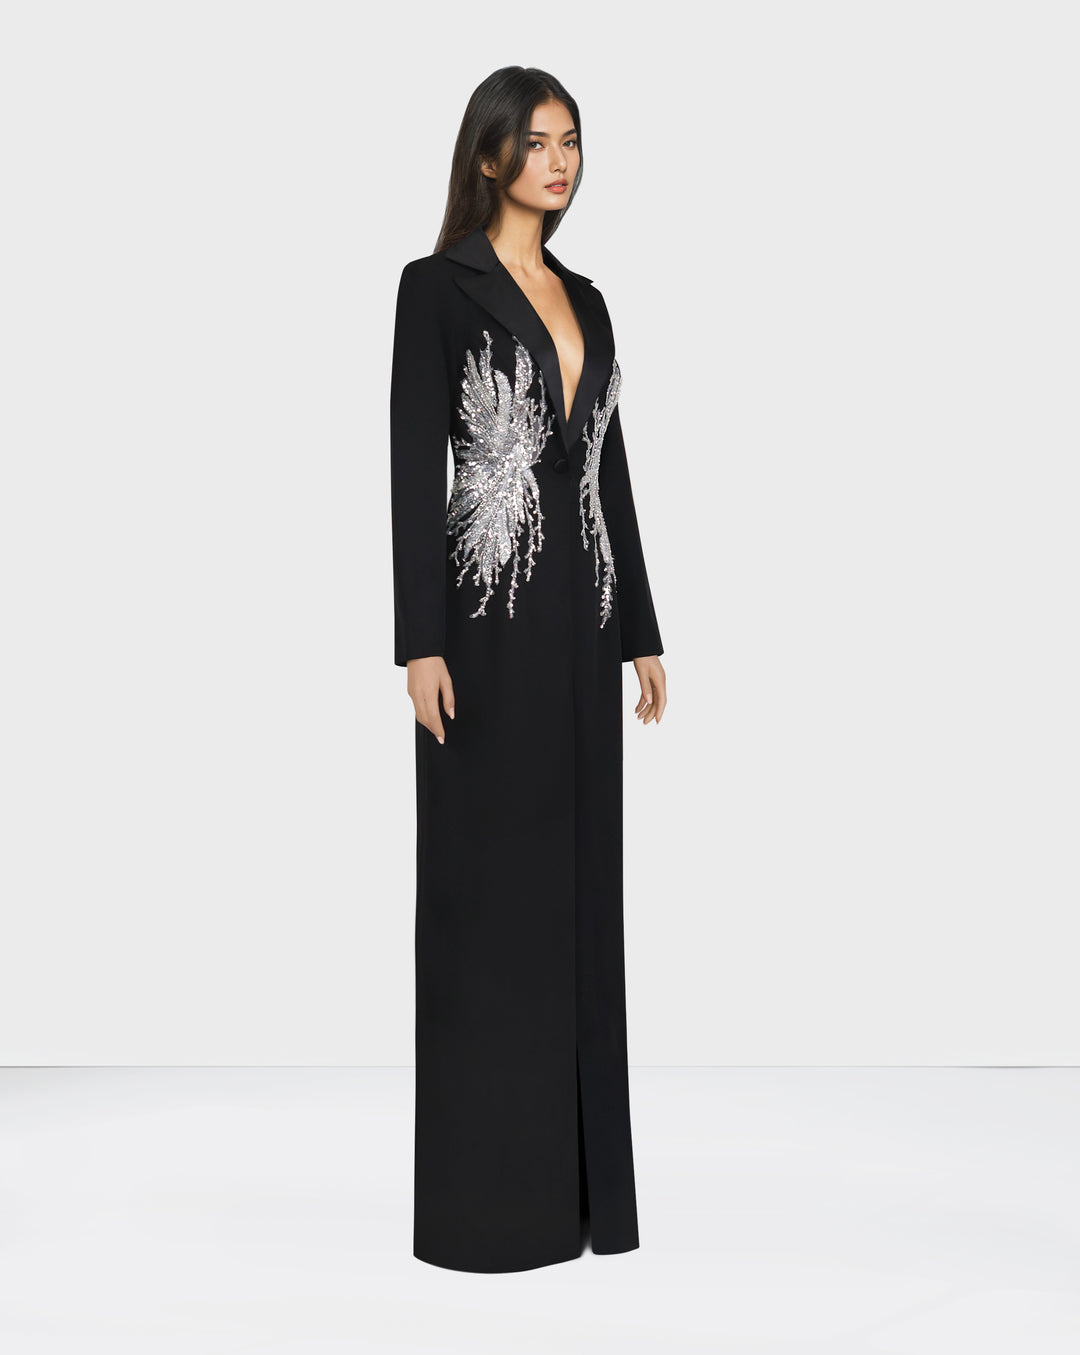 Sequined blazer dress with satin lapels